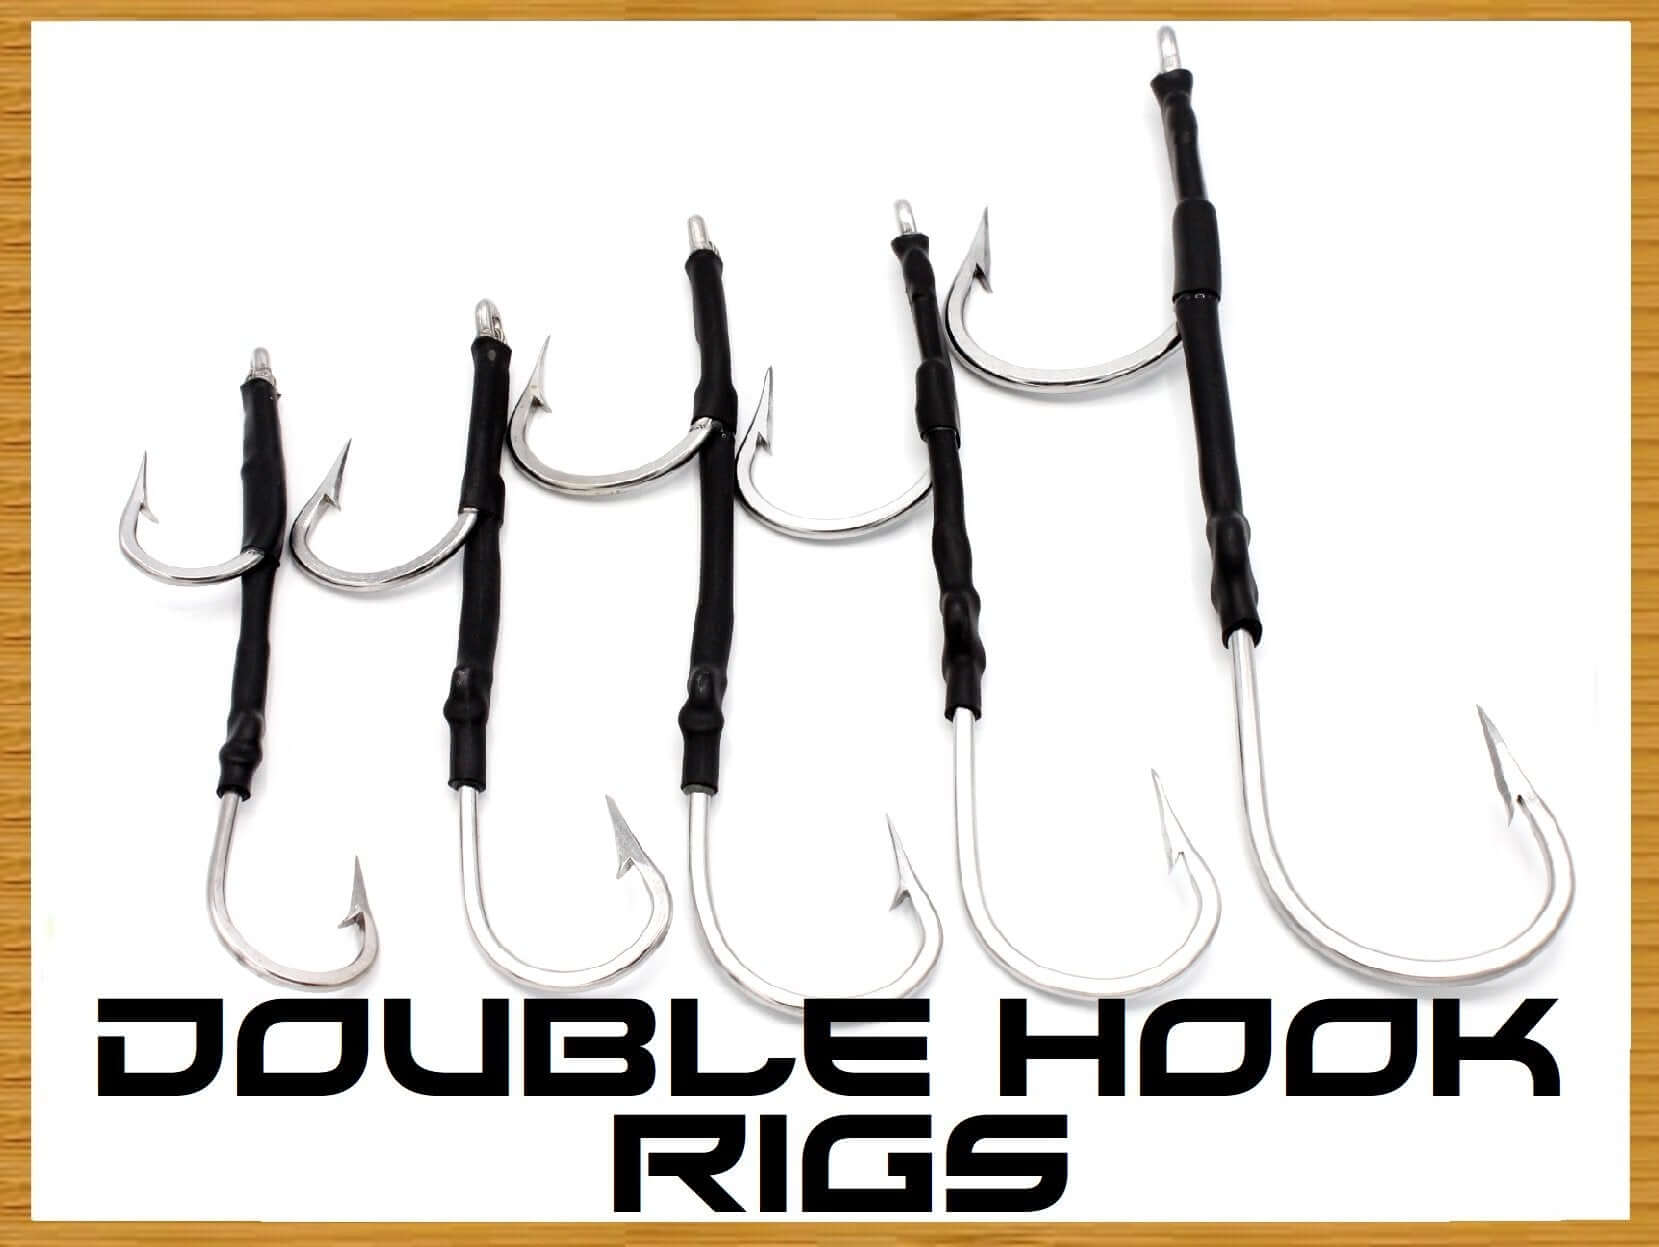 Double Hook Rigs  TORMENTER OCEAN Fishing Tackle